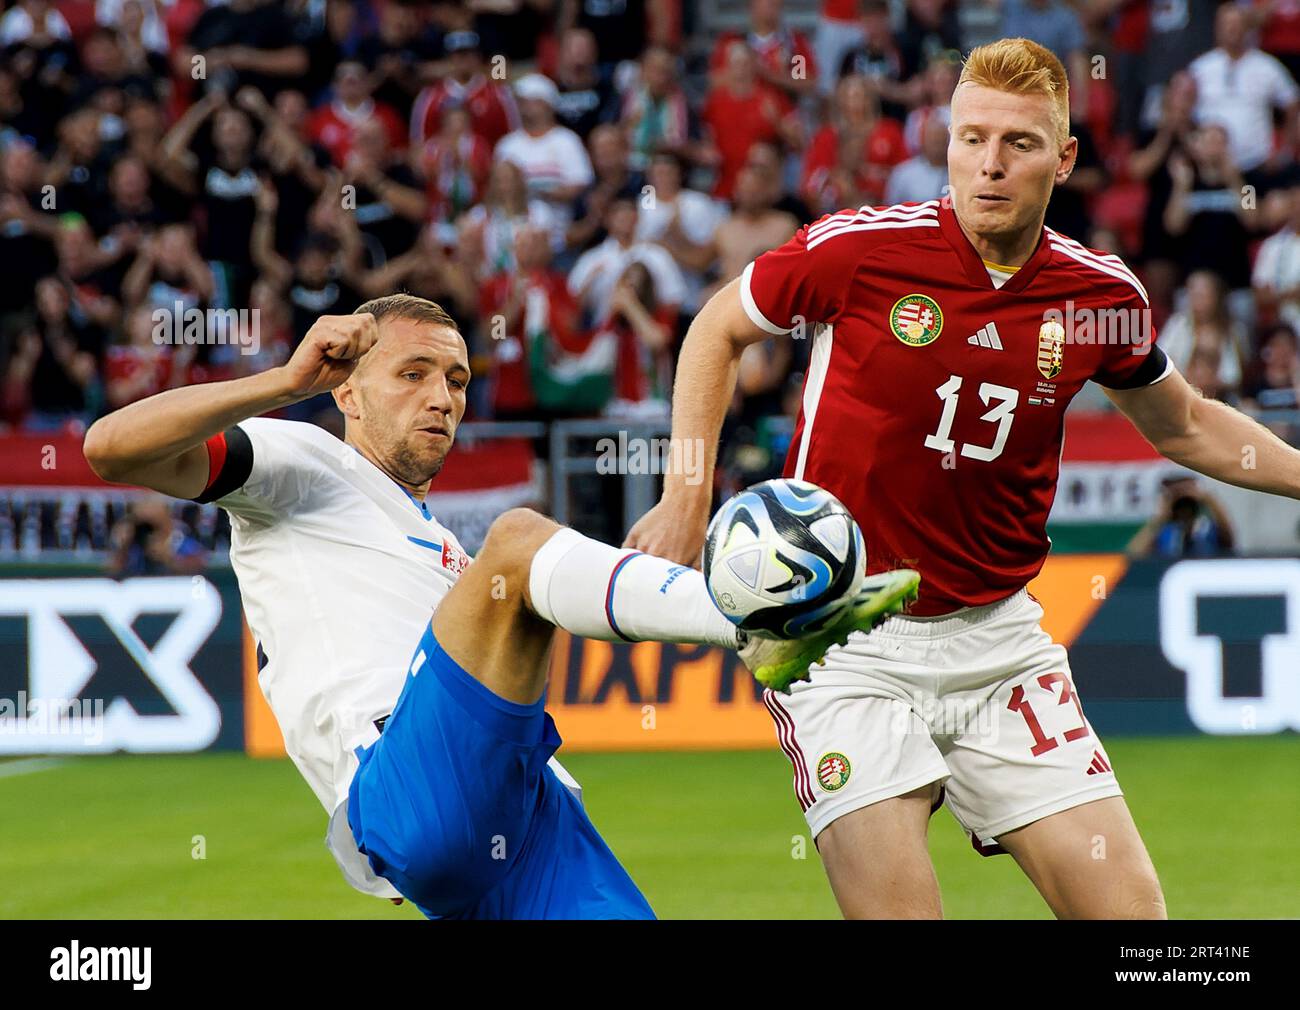 Budapest, Hungary. 10th September, 2023. Tomas Soucek of Czech Republic fights for the possession with Zsolt Kalmar of Hungary during the International Friendly match between Hungary and Czech Republic at Puskas Arena on September 10, 2023 in Budapest, Hungary. Credit: Laszlo Szirtesi/Alamy Live News Stock Photo